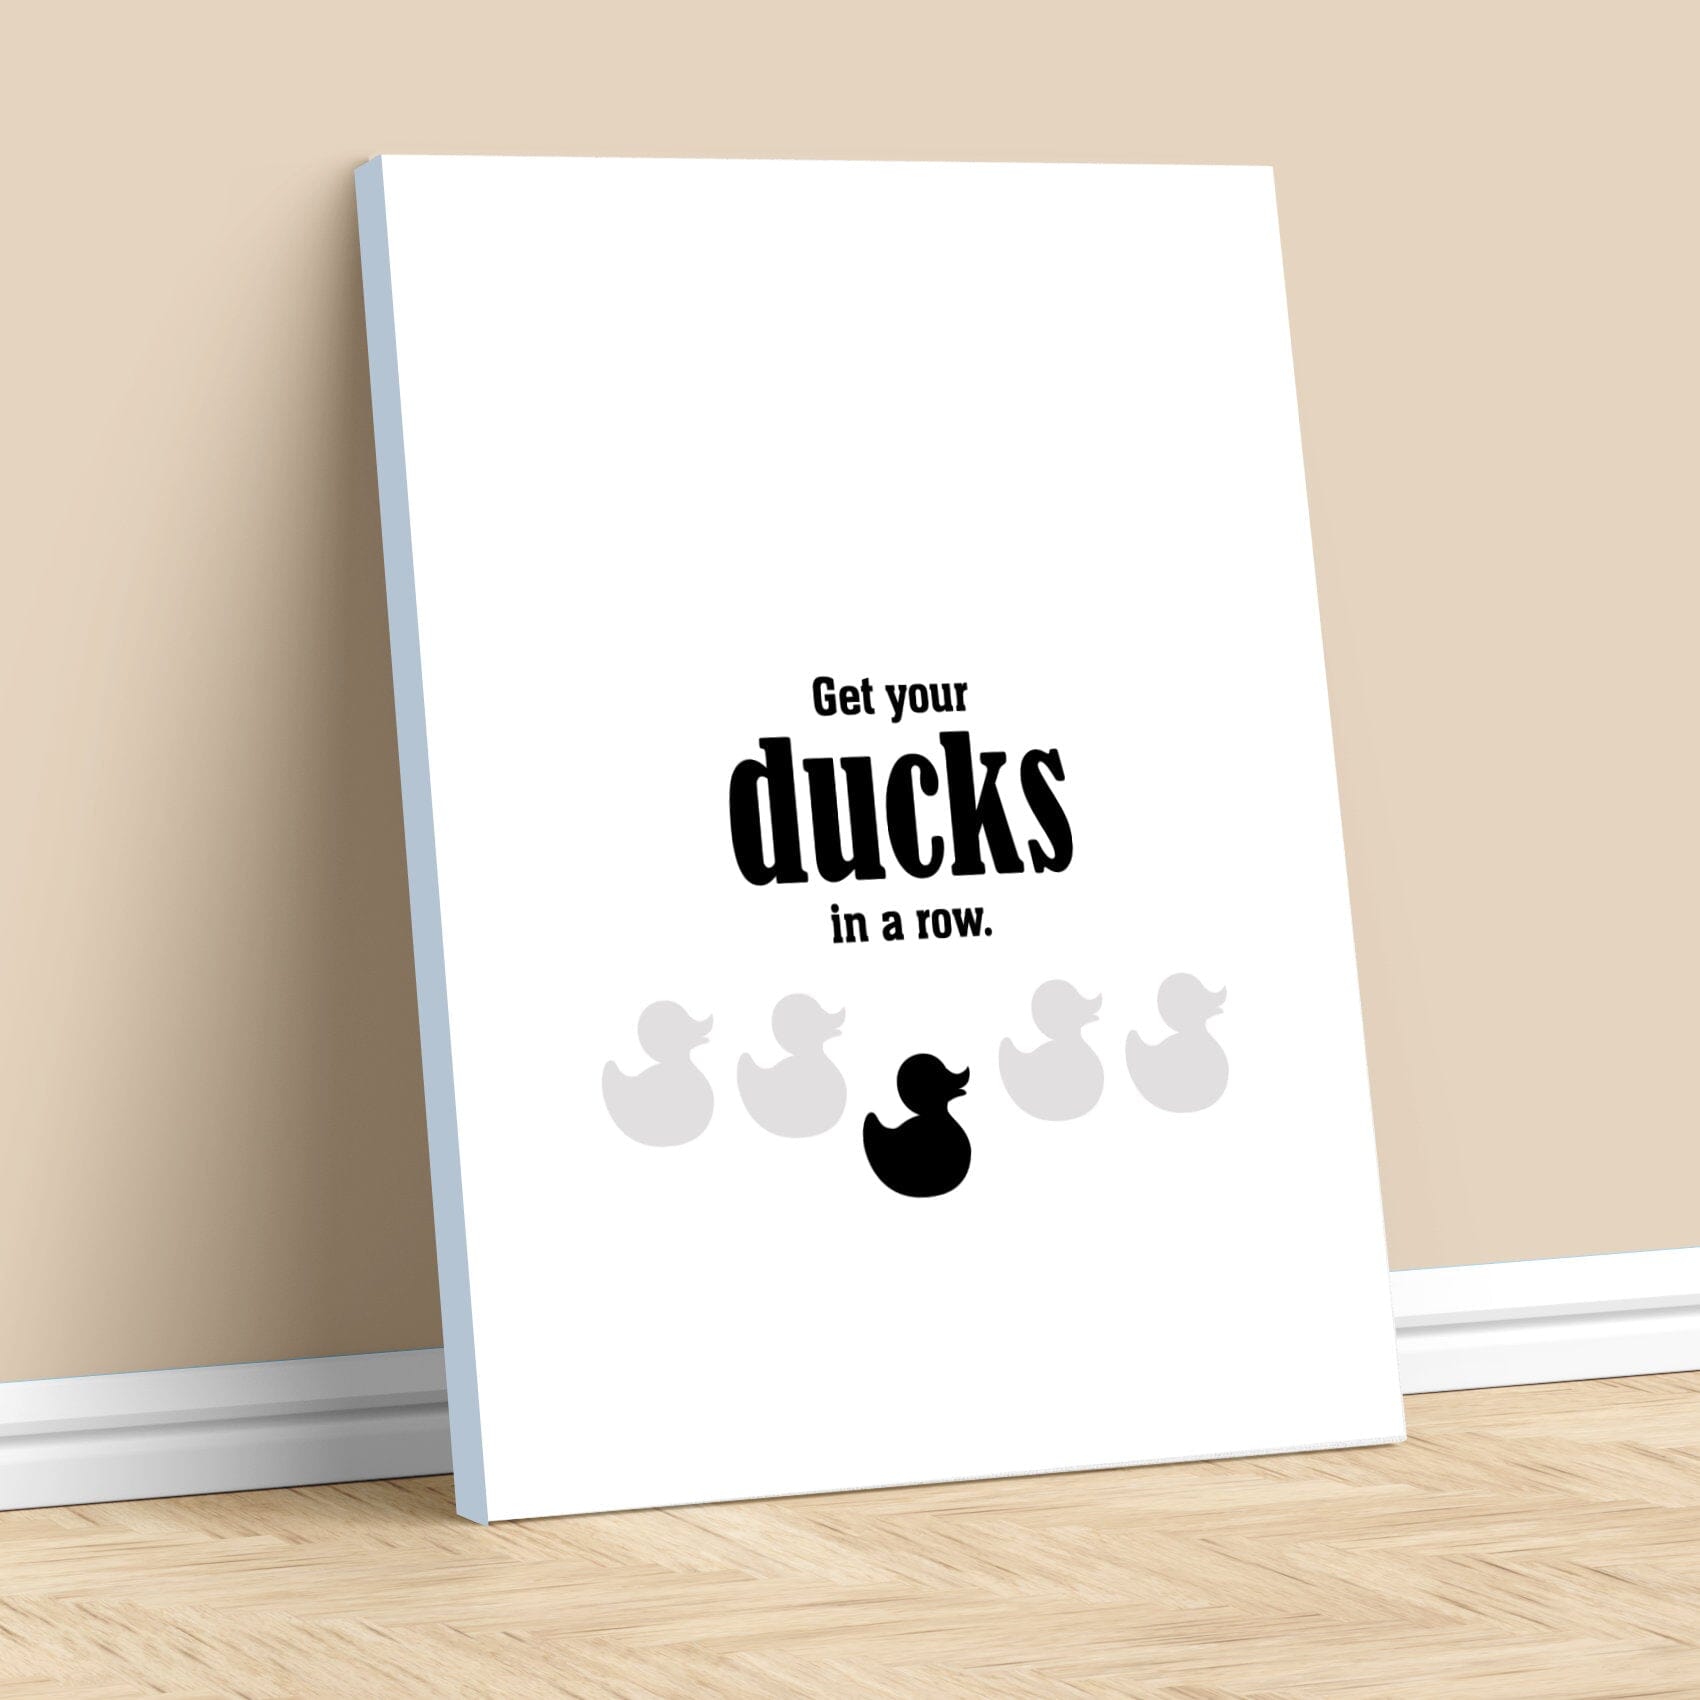 Wise and Witty Sarcastic Print - Get Your Ducks in a Row Wise and Wiseass Quotes Song Lyrics Art 11x14 Canvas Wrap 